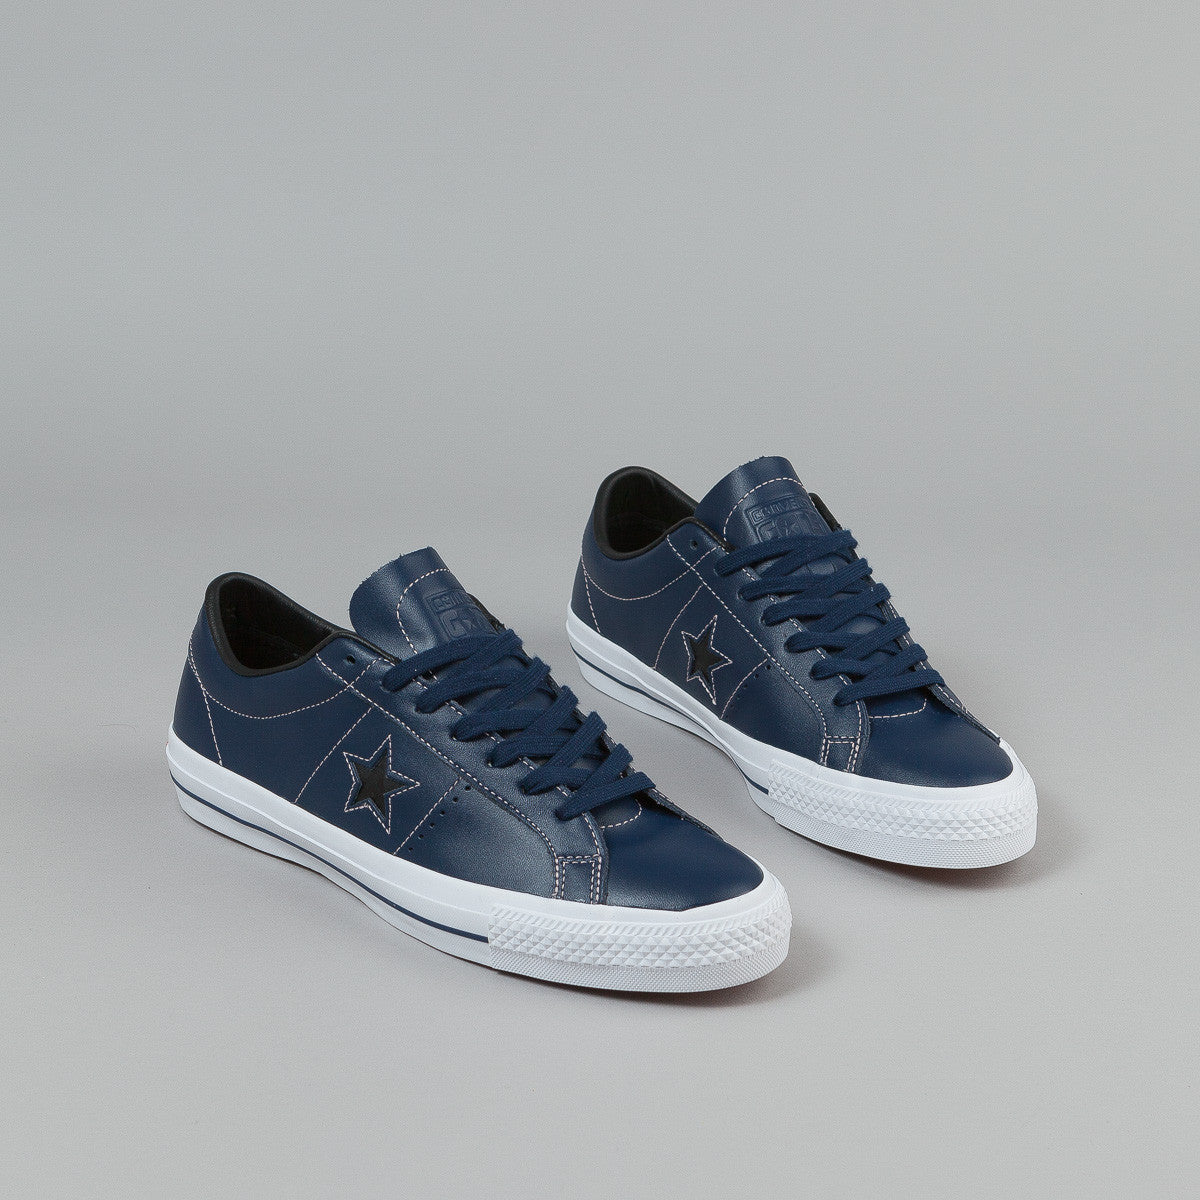 Converse One Star Skate Pro Ox Shoes - Nighttime Navy / Pink Freeze